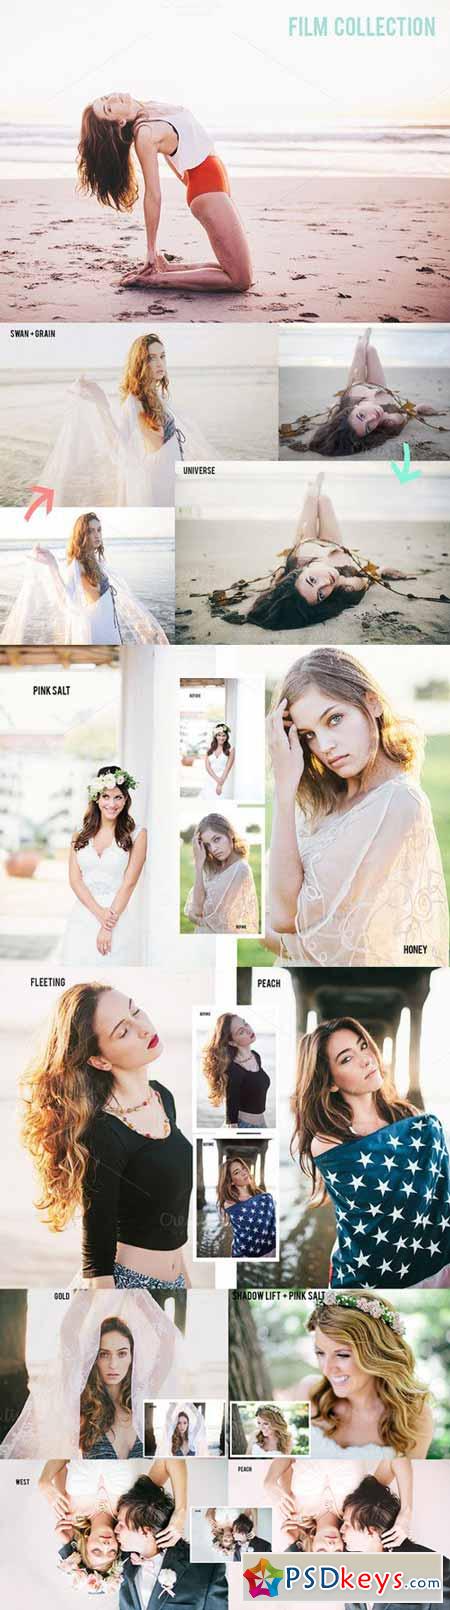 Film Photoshop Actions-90+ Actions 327294